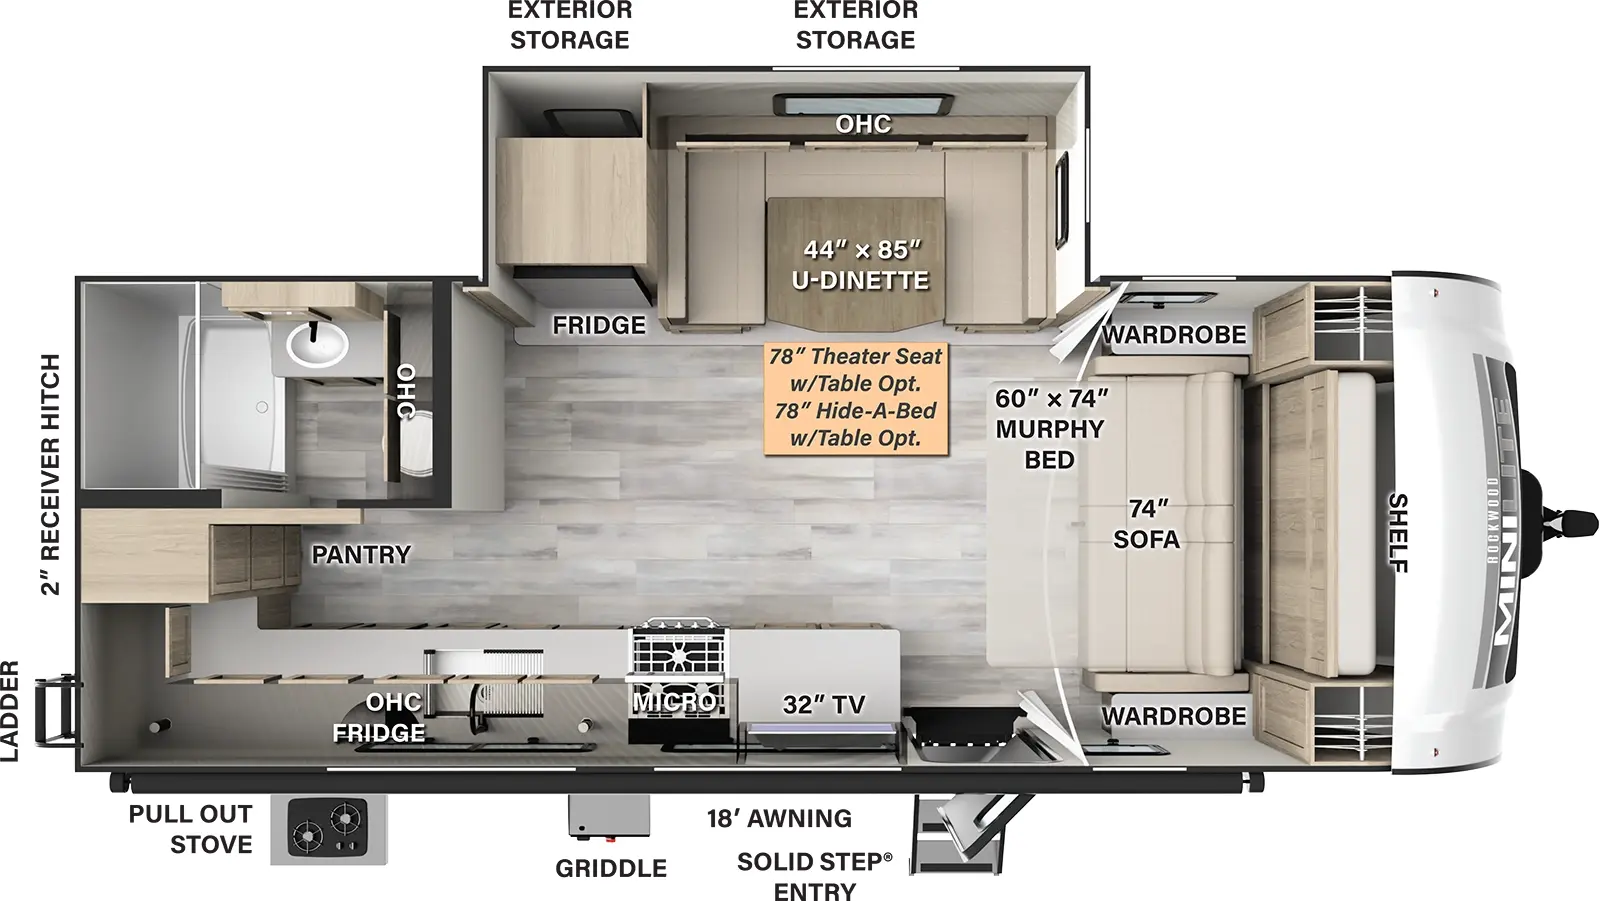 The 2517S has one slideout and one entry. Exterior features an 18 foot awning, solid step entry, griddle, pull-out stove, off-door side exterior storage, rear ladder, and 2 inch receiver hitch. Interior layout front to back: murphy bed/sofa with overhead shelf, and wardrobes on each side; off-door side slideout with u-dinette, overhead cabinet, and refrigerator (optional theater seat with table or hide-a-bed sofa with table); door side entry, kitchen counter with TV, cooktop, microwave, overhead cabinet, and sink wraps to rear with pantry; rear off-door side full bathroom with overhead cabinet.